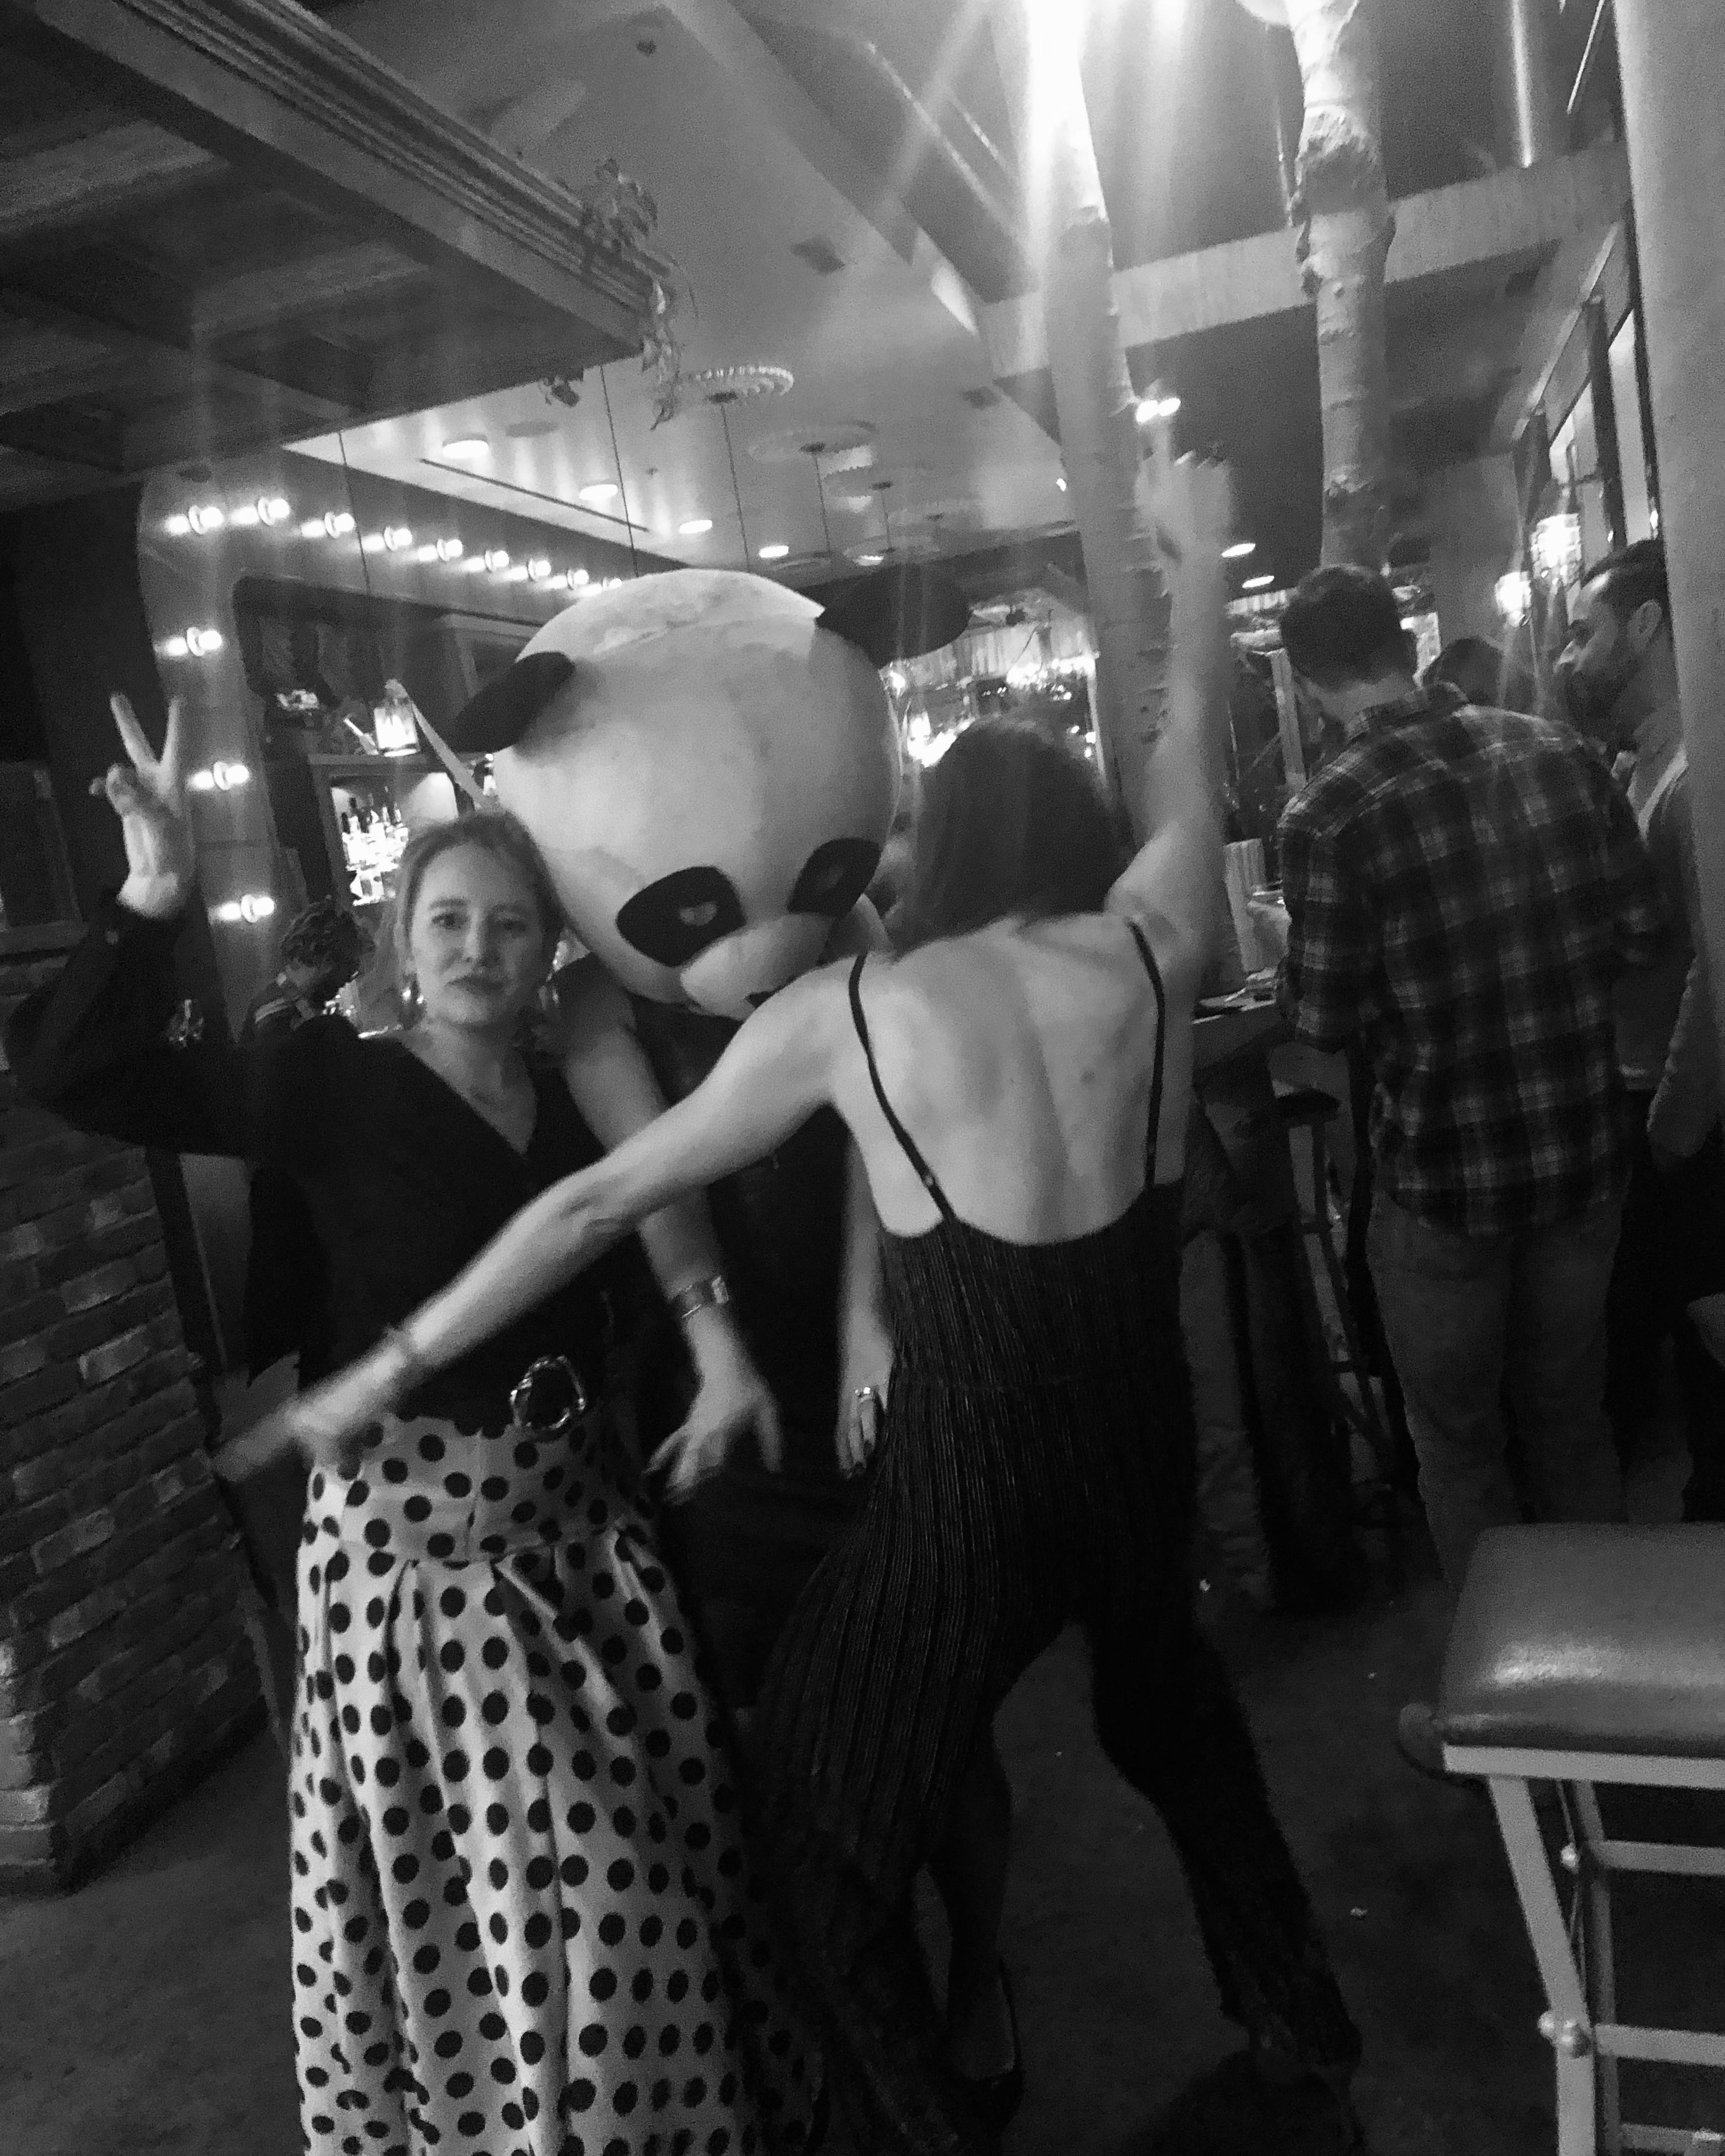 Two young women are in a bar setting posing with a person wearing a panda’s head. One wears a polka dotted dress and holds up the peace sign. The other is mid dance and in a black jump suit. 